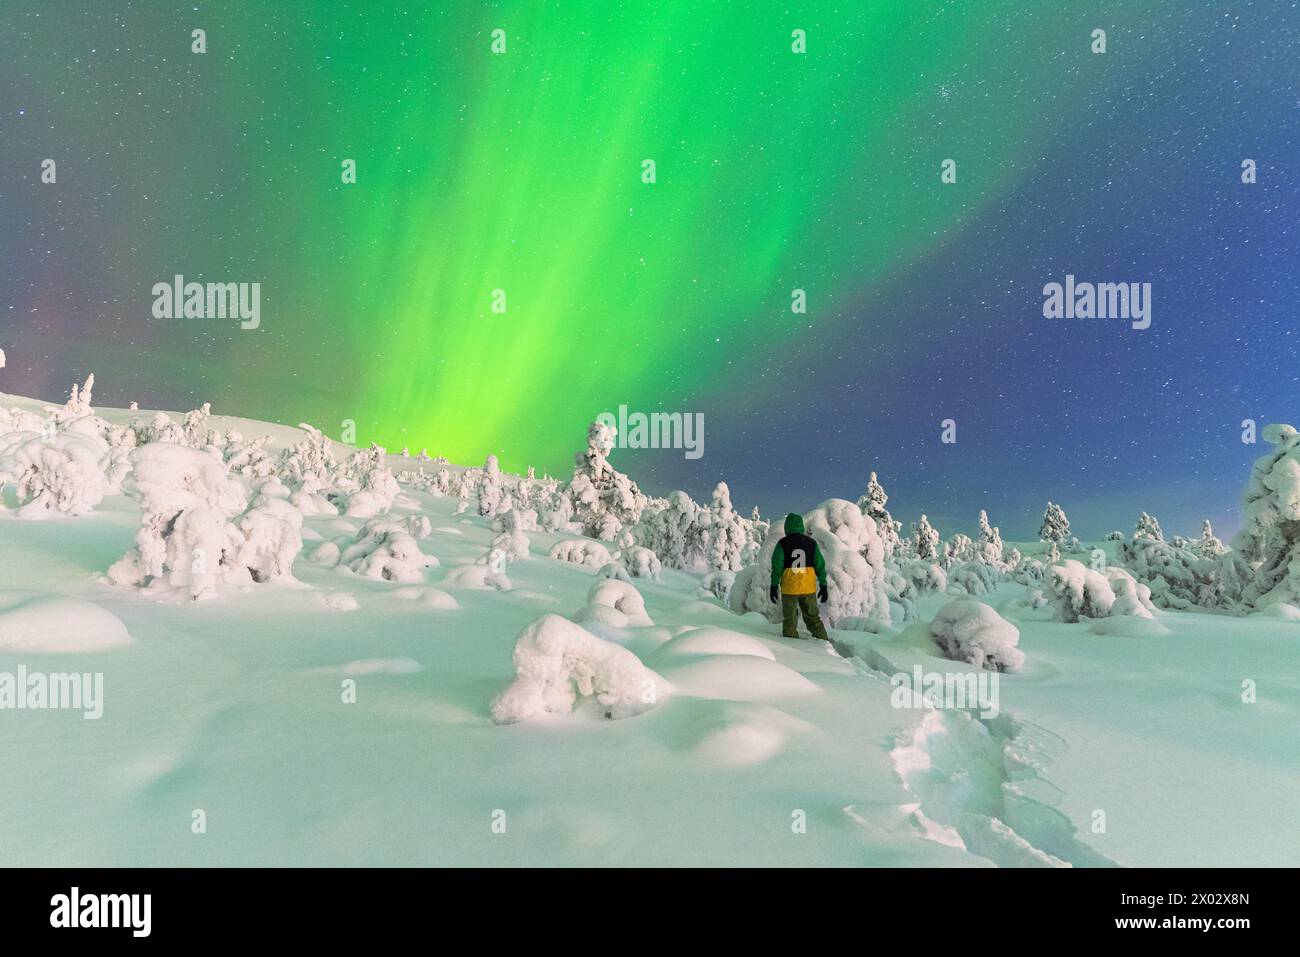 Rear view of a man in the snowy frozen forest watching at the Northern Lights (Aurora Borealis) colouring the sky Stock Photo